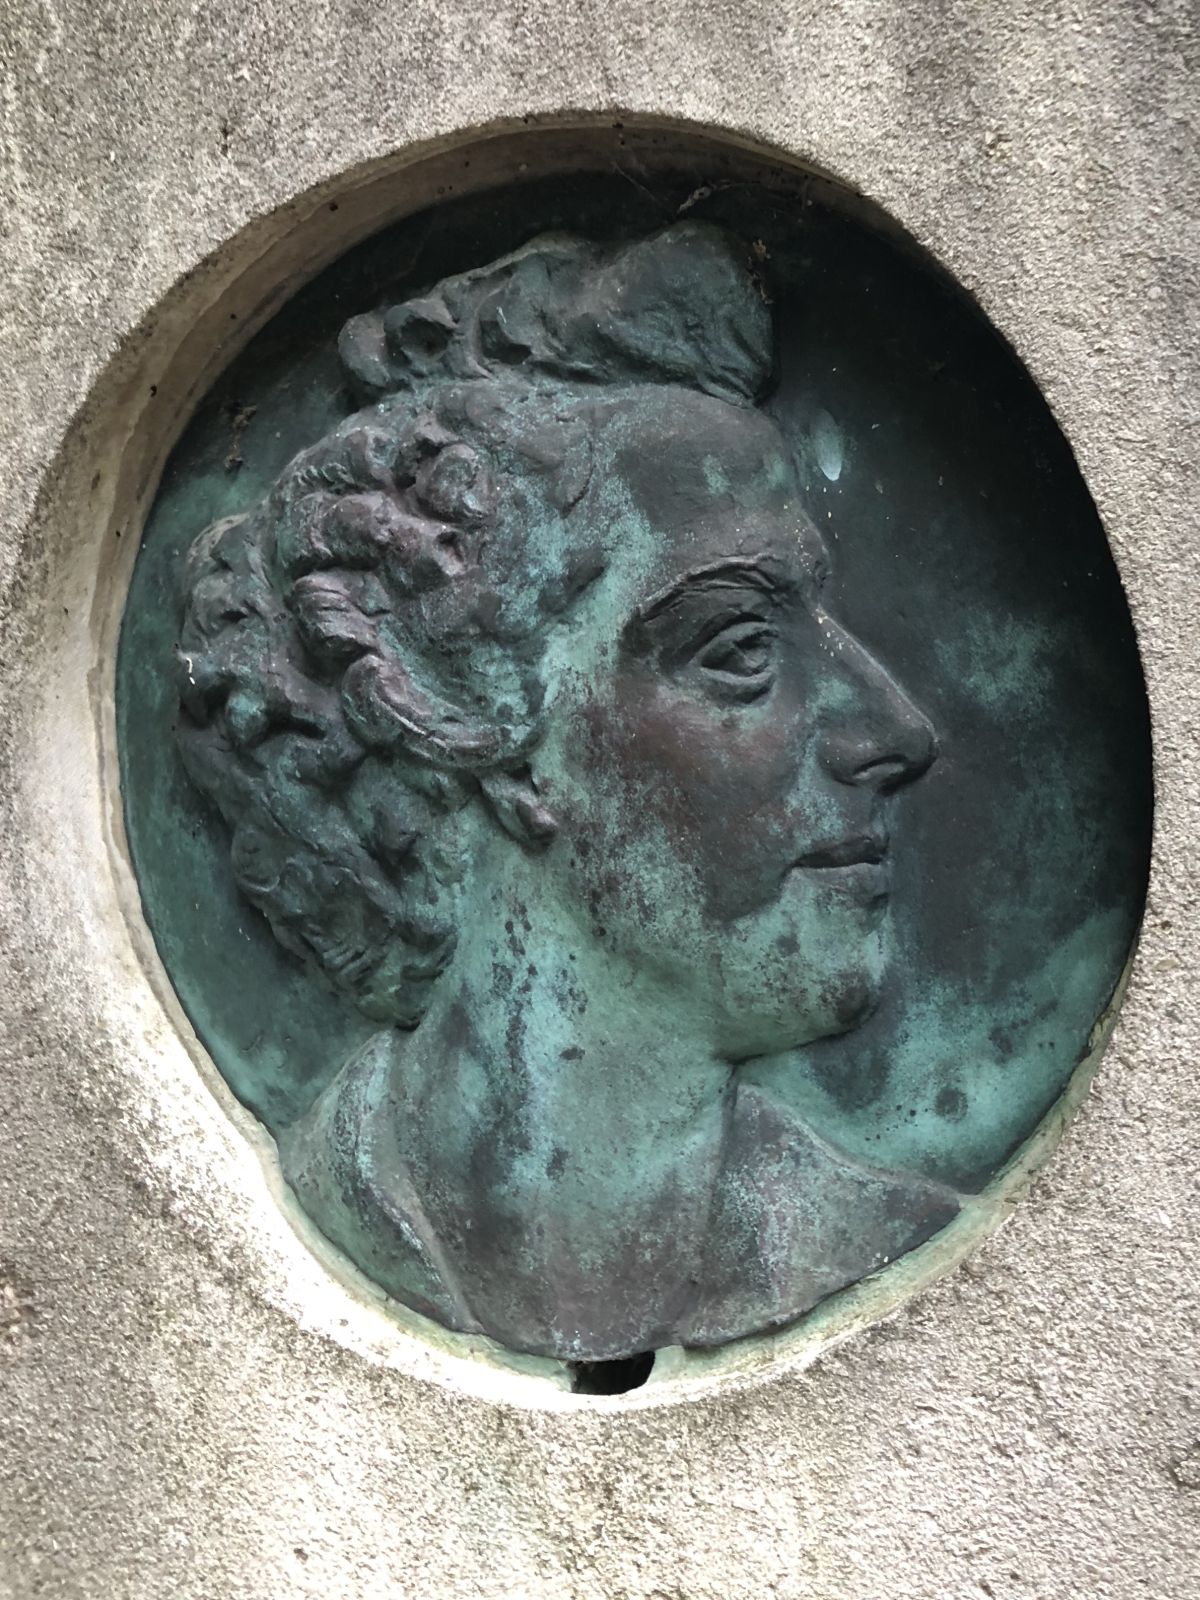 Tombstone of violinist Ginette Neveu by Alina Szapocznikow in Paris